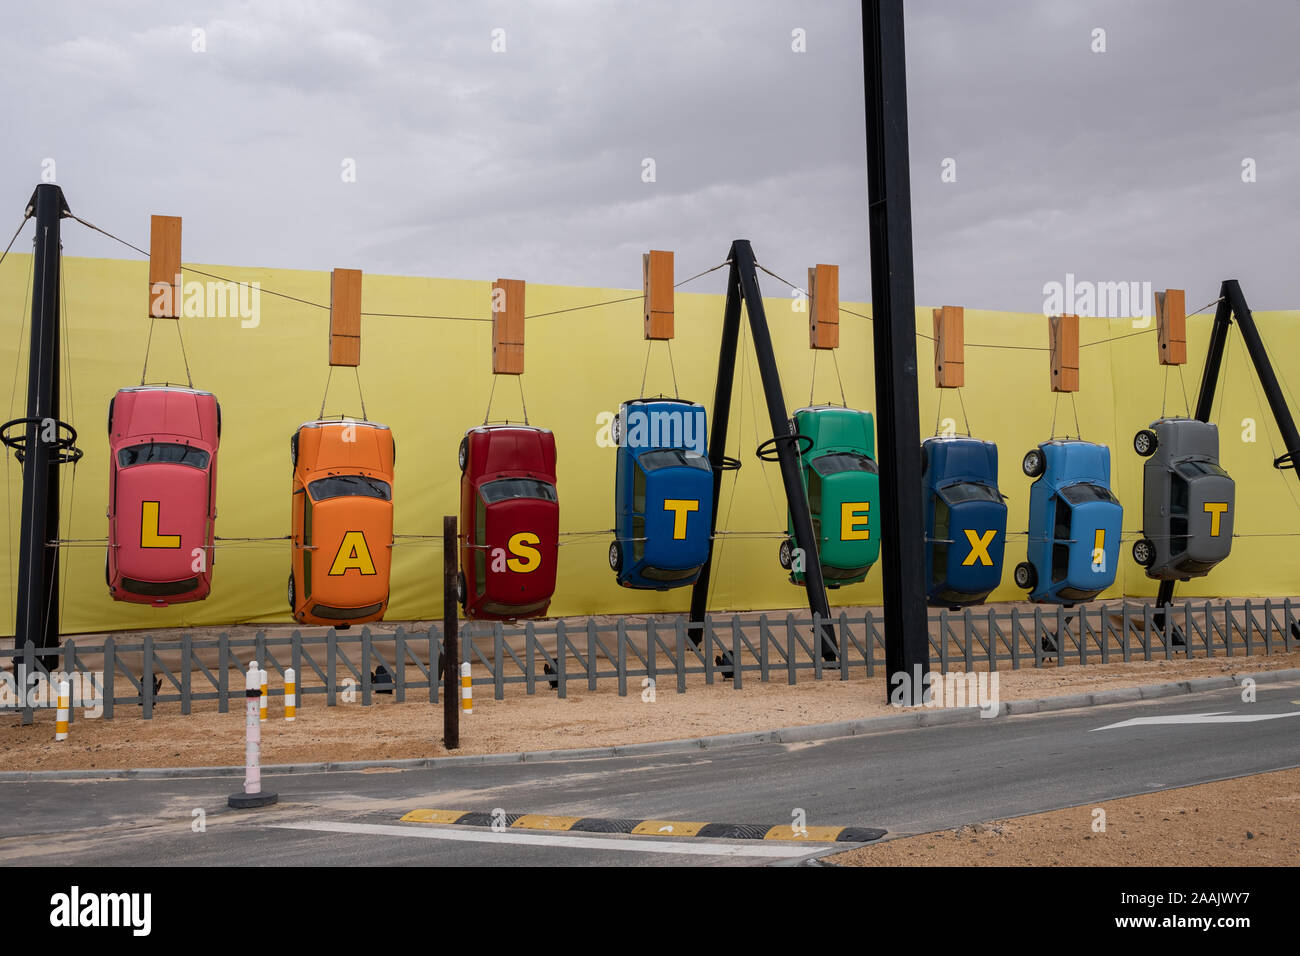 Last Exit sign made with hanging cars at E11 Sheikh Zayed Road, Abu Dhabi, UAE Stock Photo